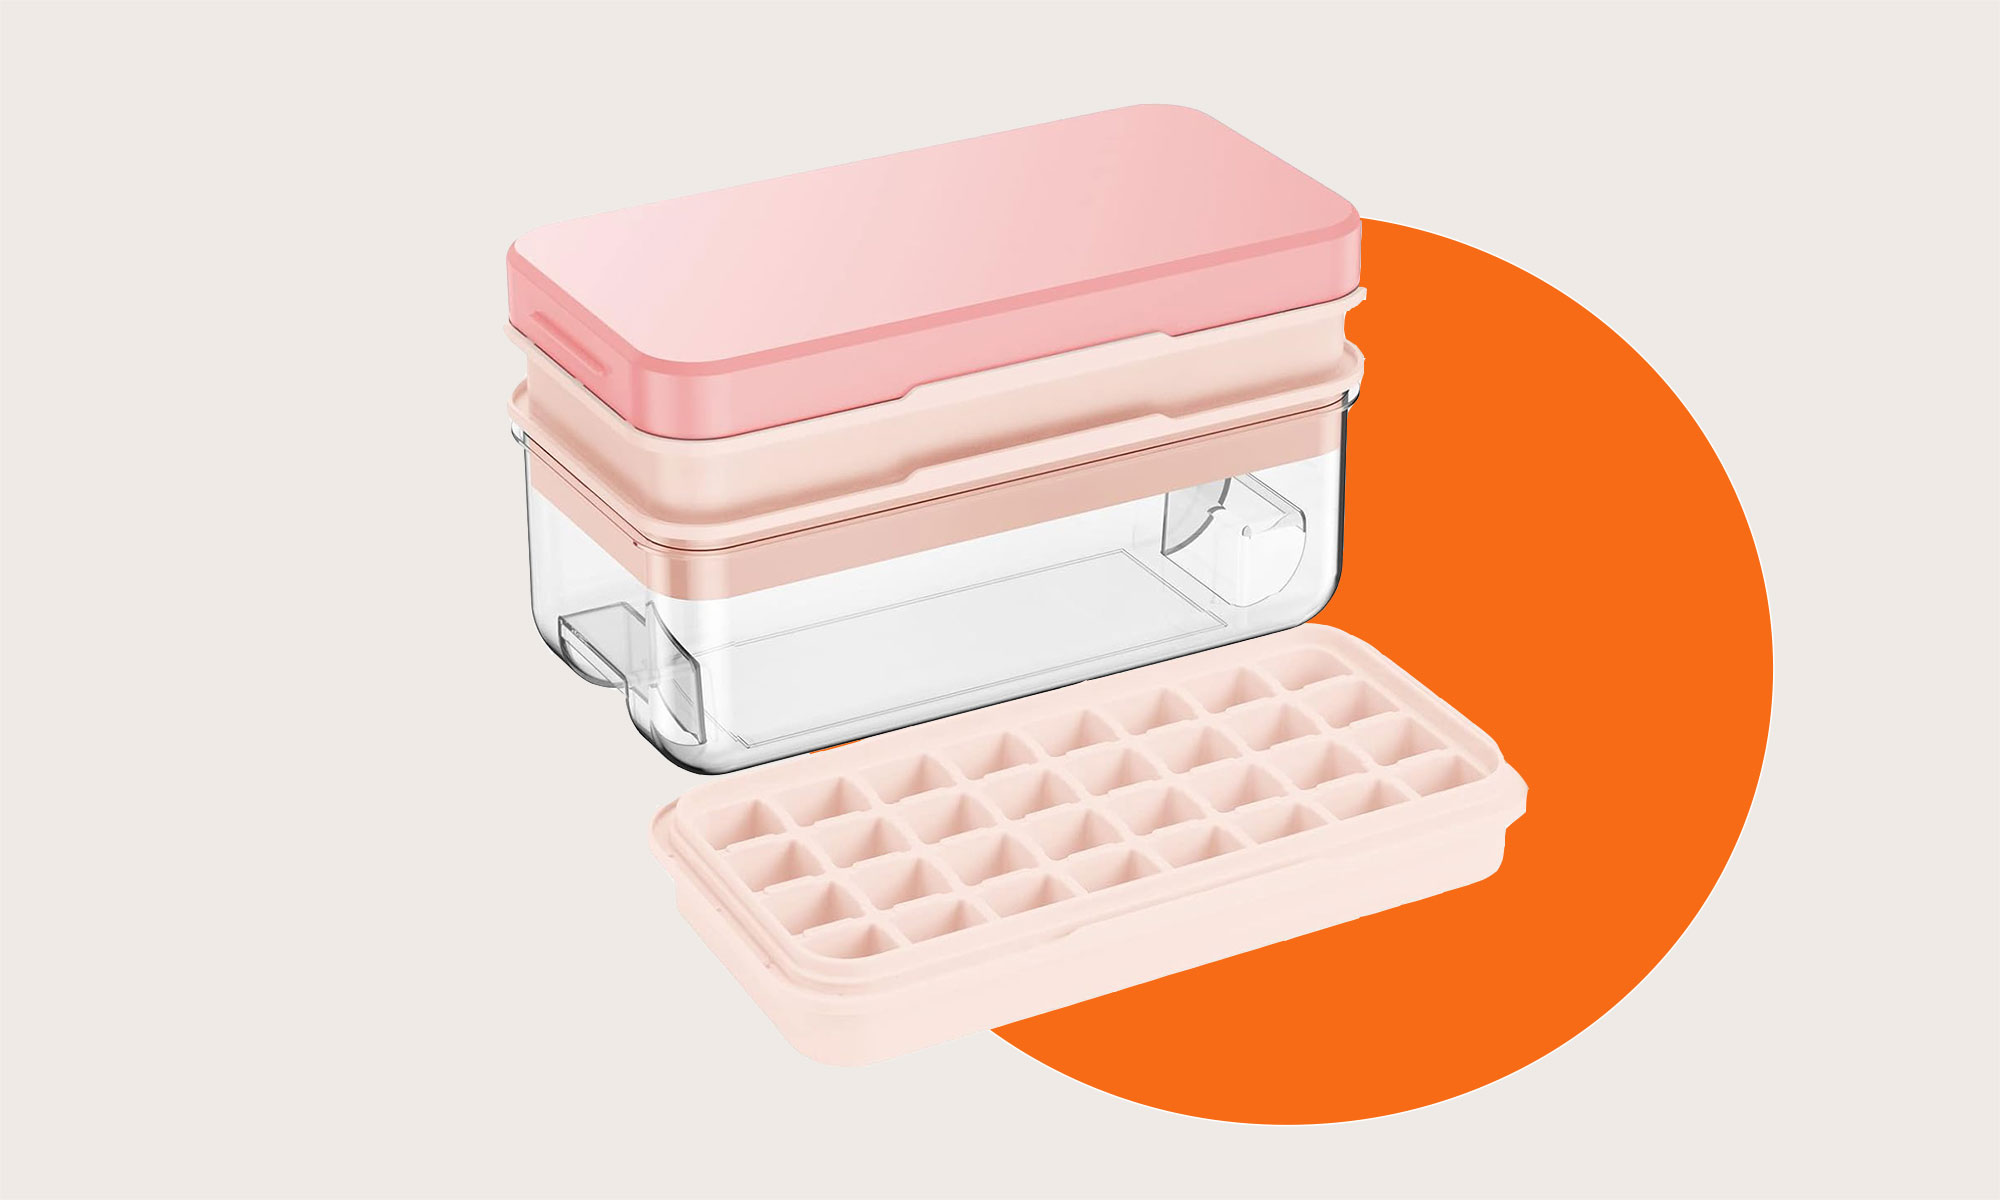 An plastic bin with pink lid and separate ice cube tray